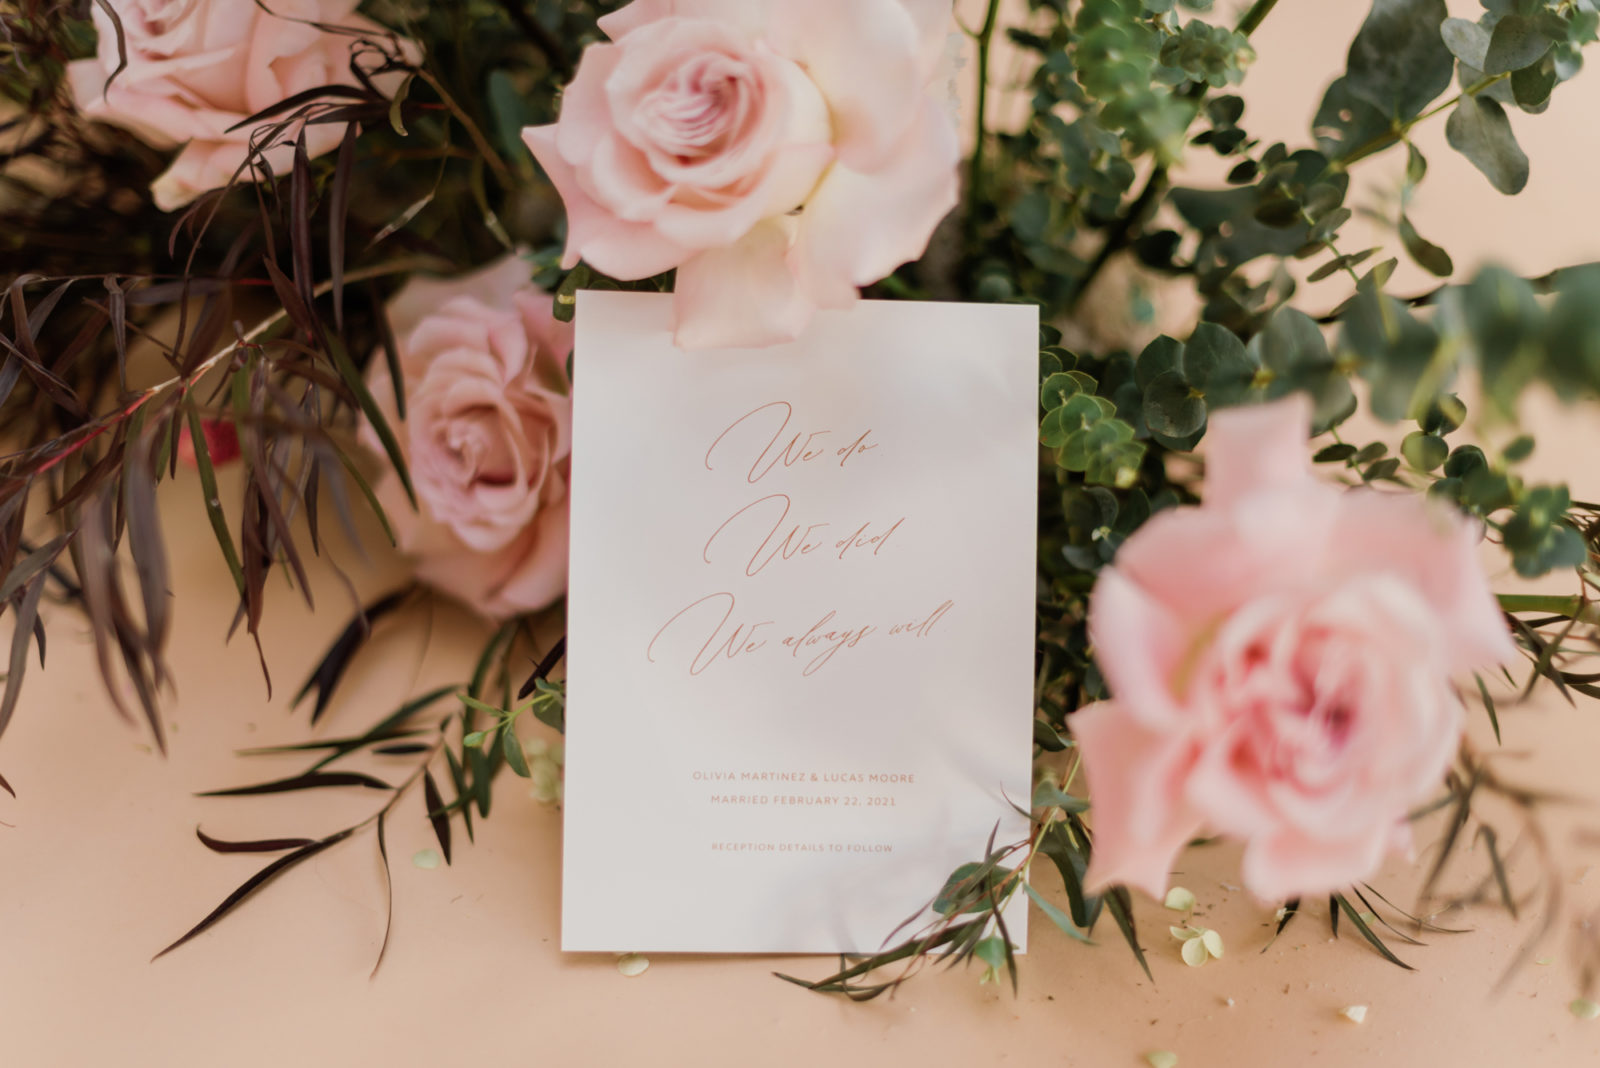 Pandemic Wedding Stationery Advice: What to Send if Your Plans Have Changed